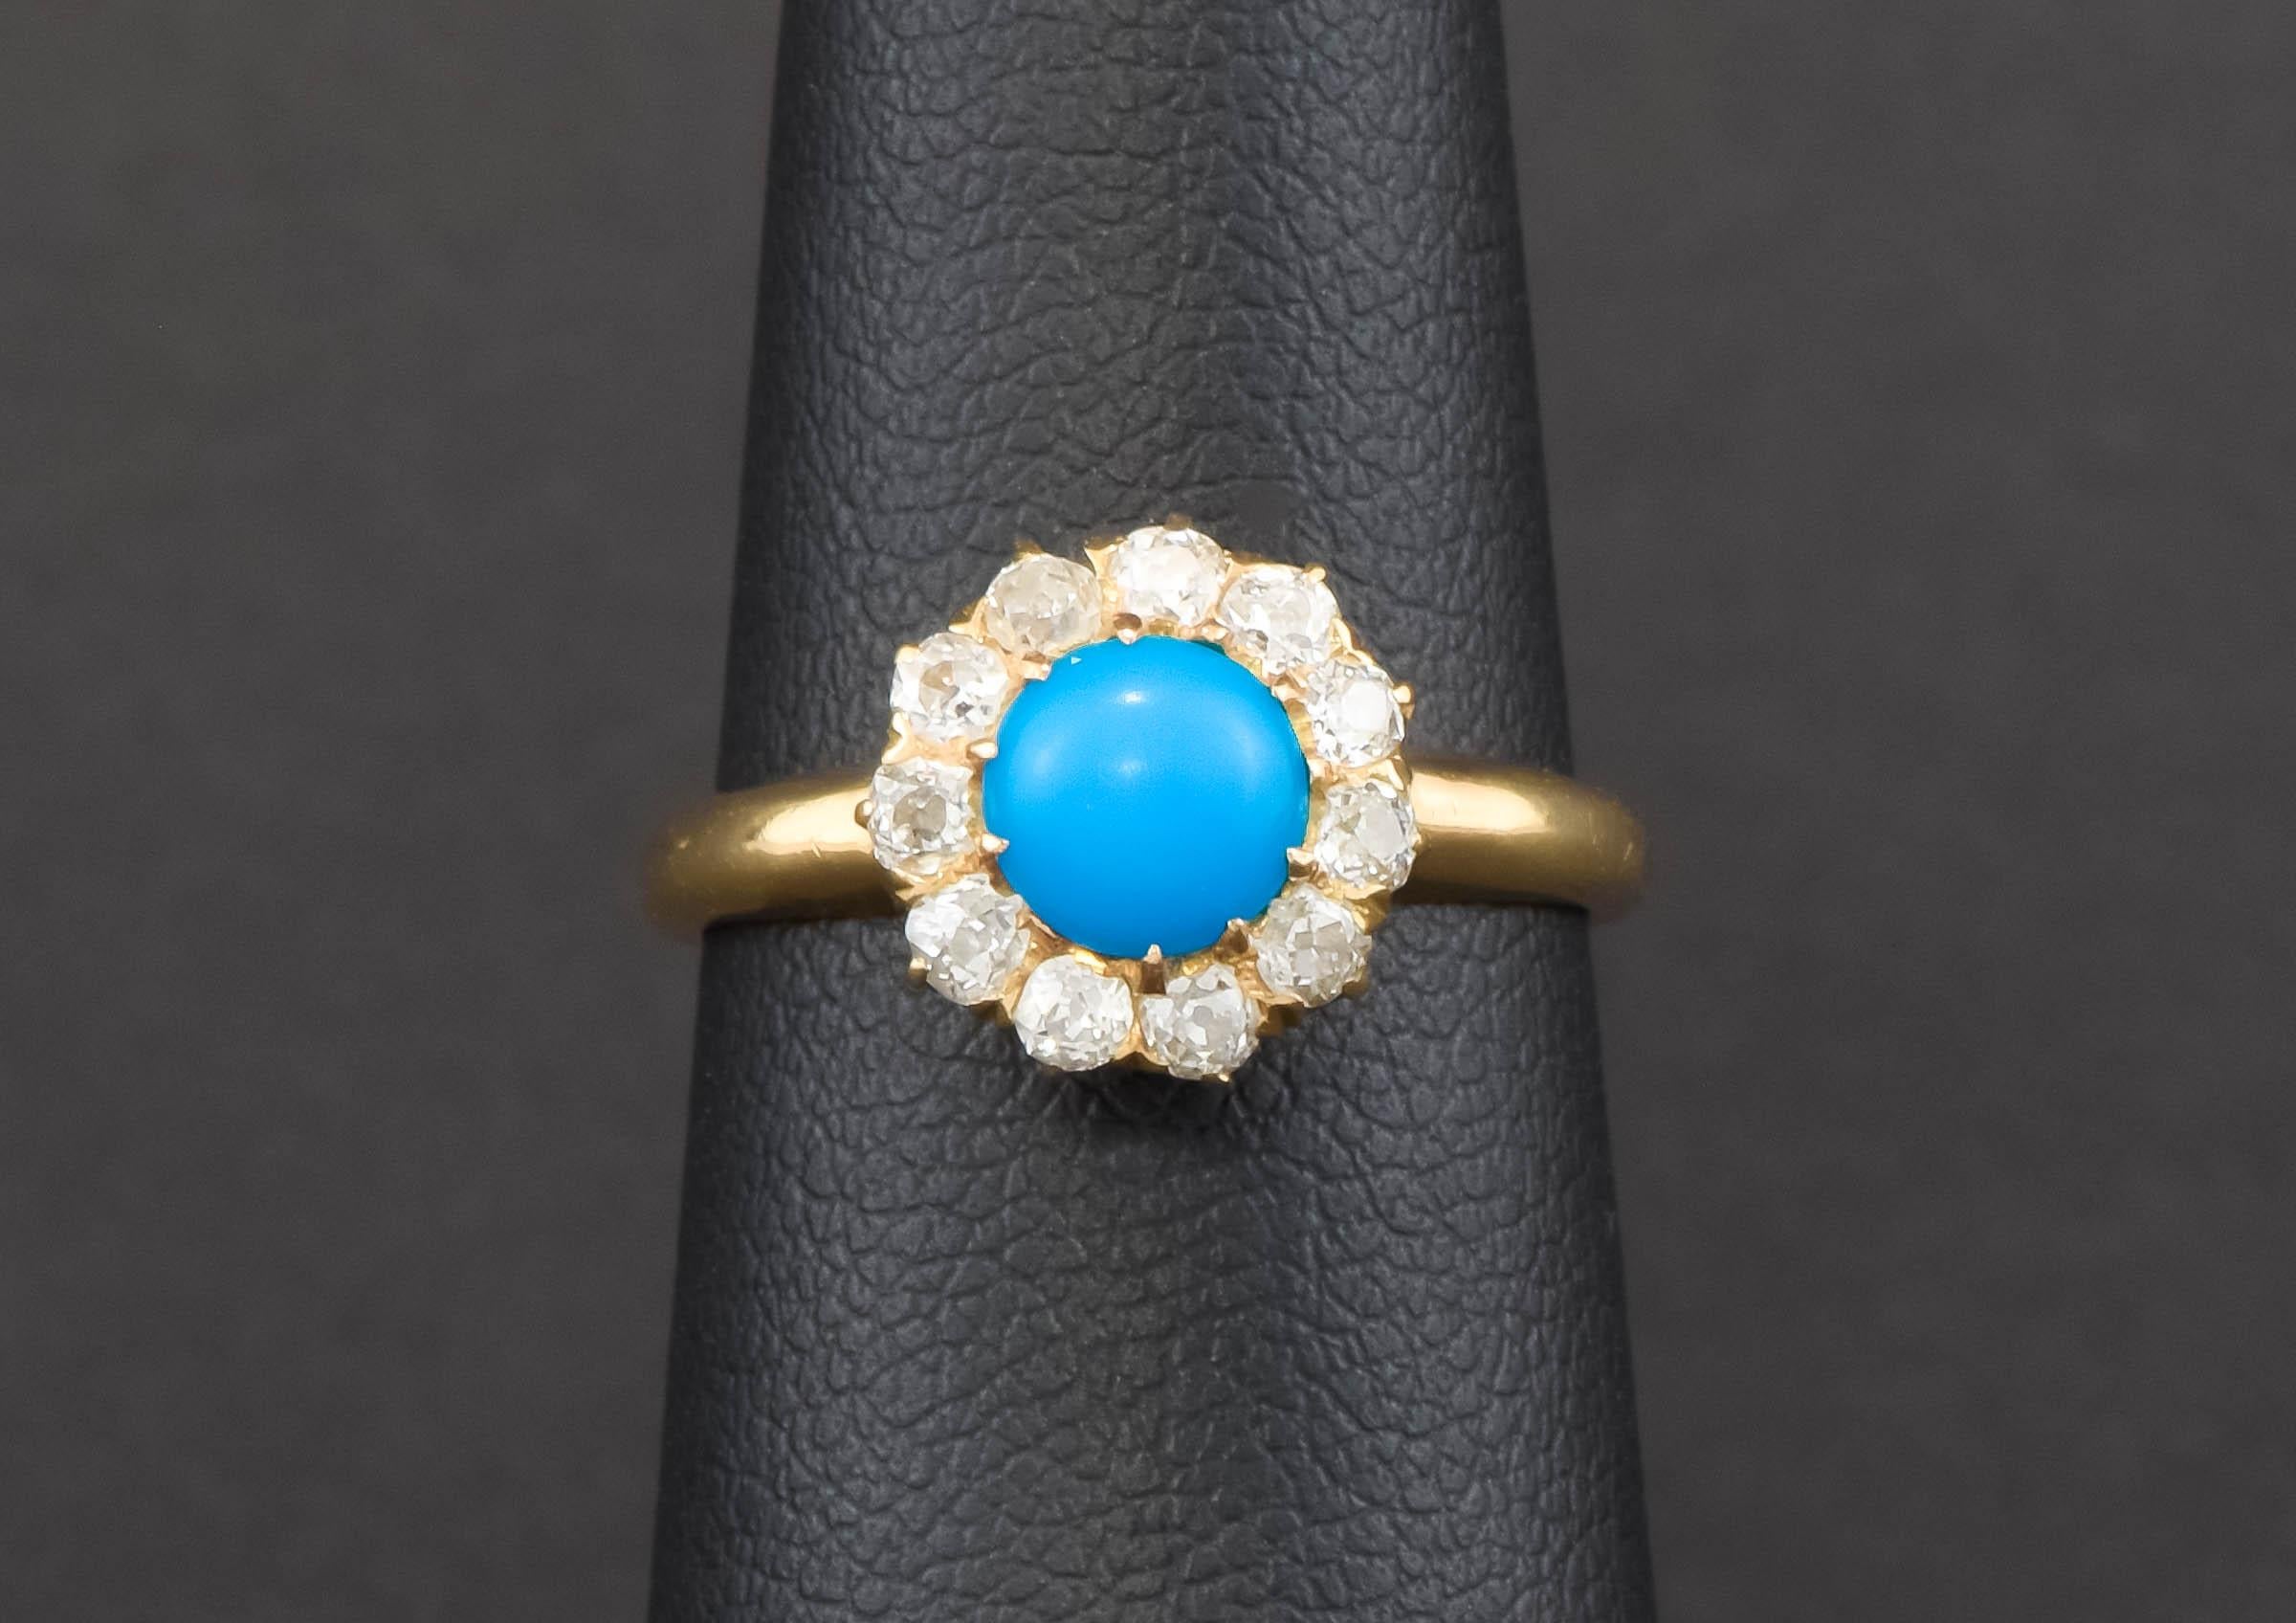 I’m pleased to offer a lovely, dainty and sparkly Victorian Persian Turquoise Diamond ring found in a New England estate.

Finely crafted of 14K yellow gold, the ring features a vividly colored turquoise cabochon surrounded by a diamond halo